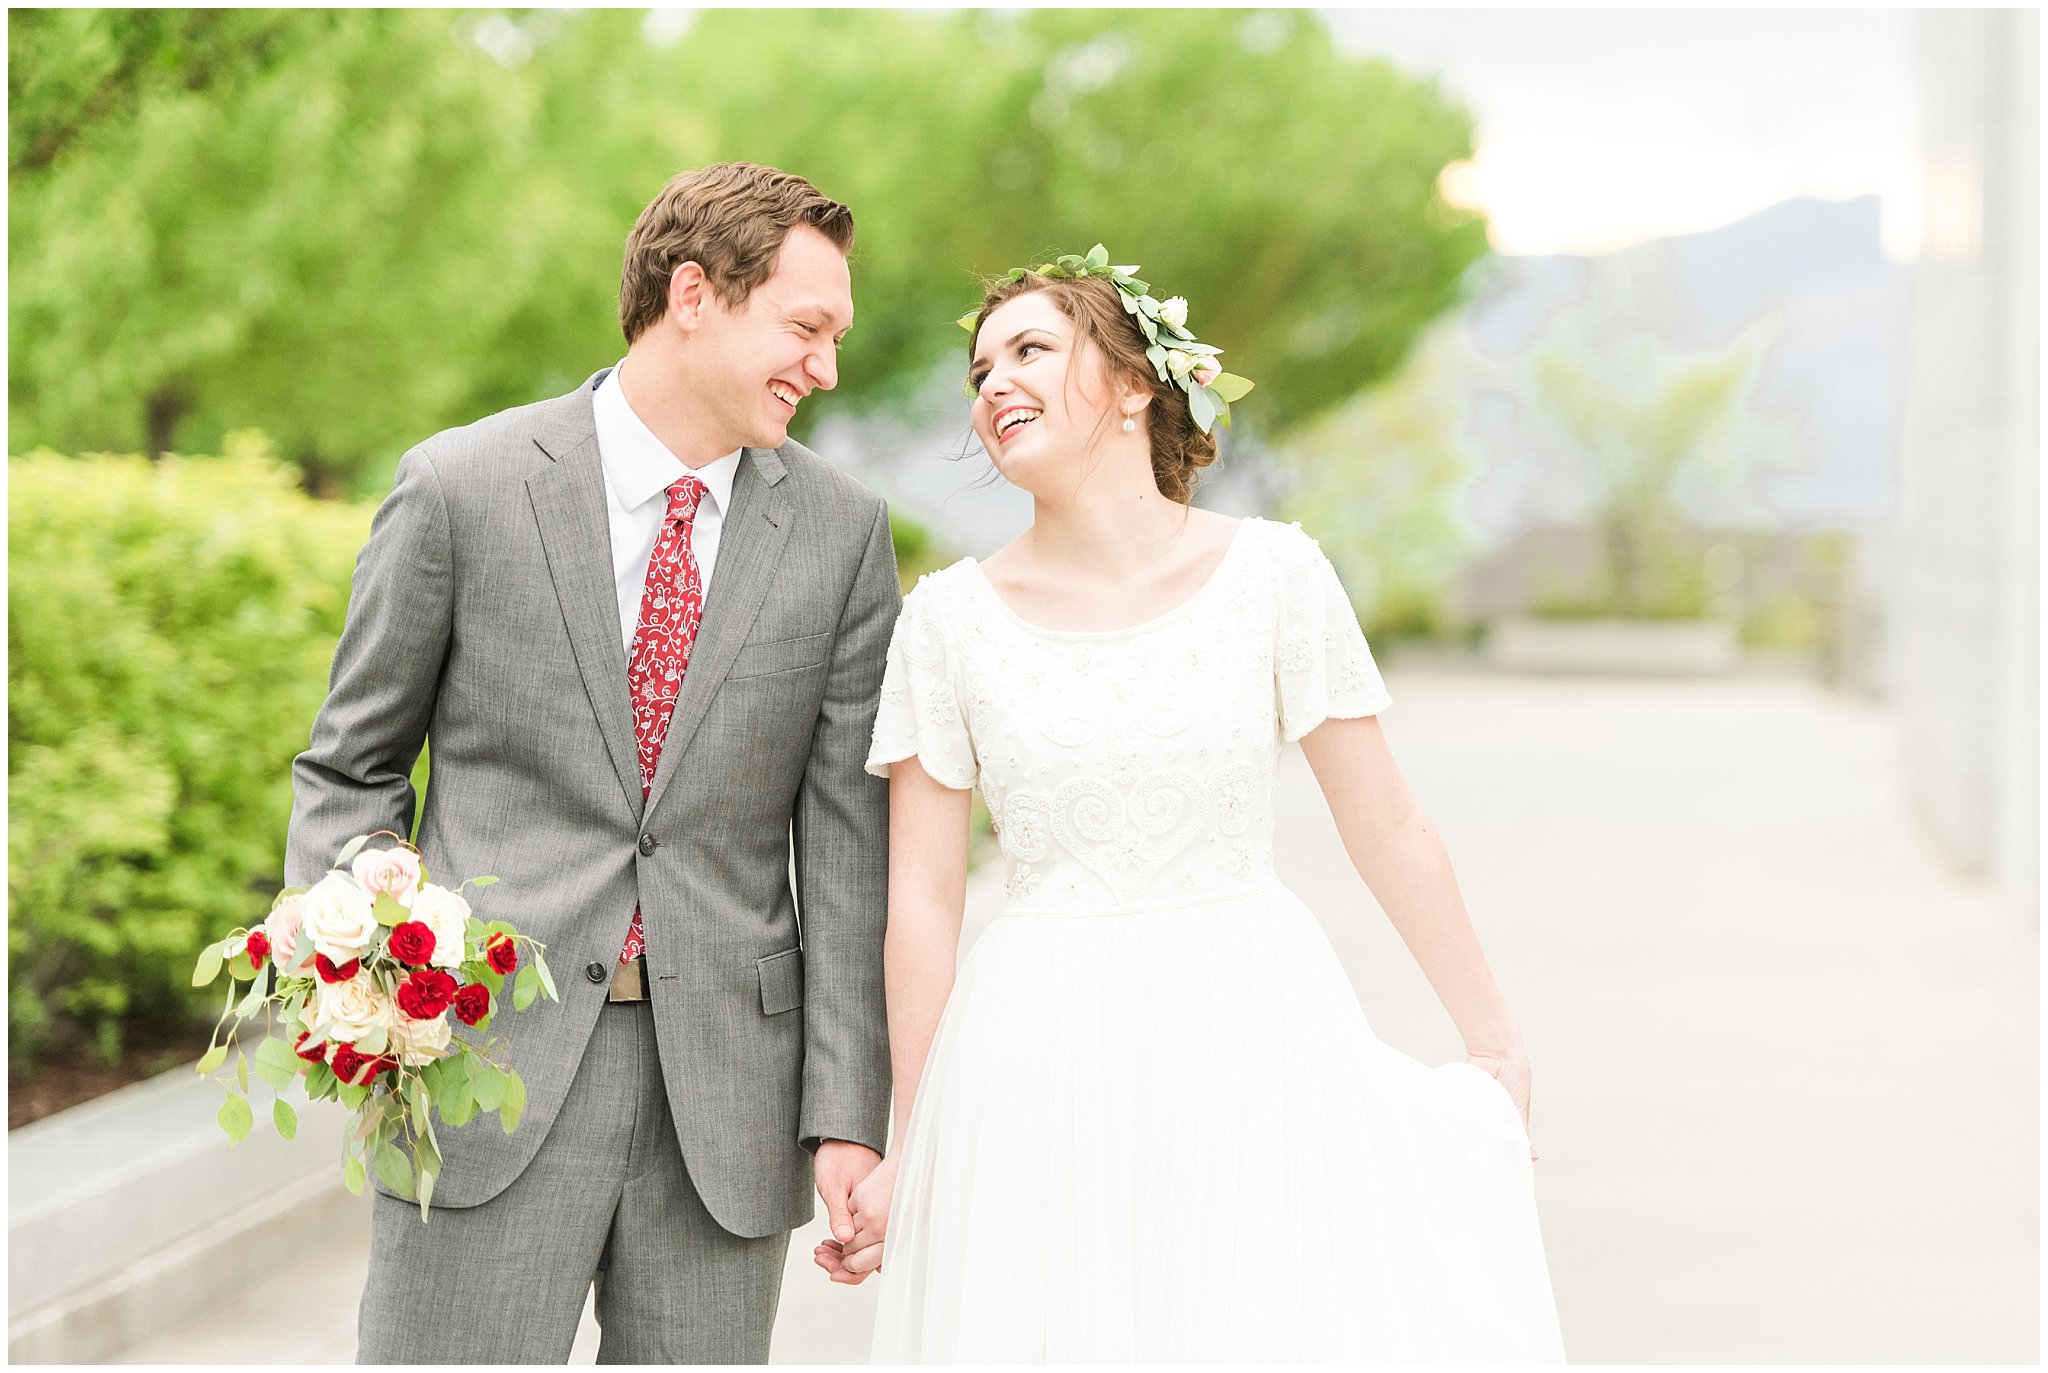 Bride and groom at the Draper Temple | Grey, Burgundy, and Gold Wedding | Draper Temple and South Mountain Wedding | Utah Wedding Photographers | Jessie and Dallin Photography